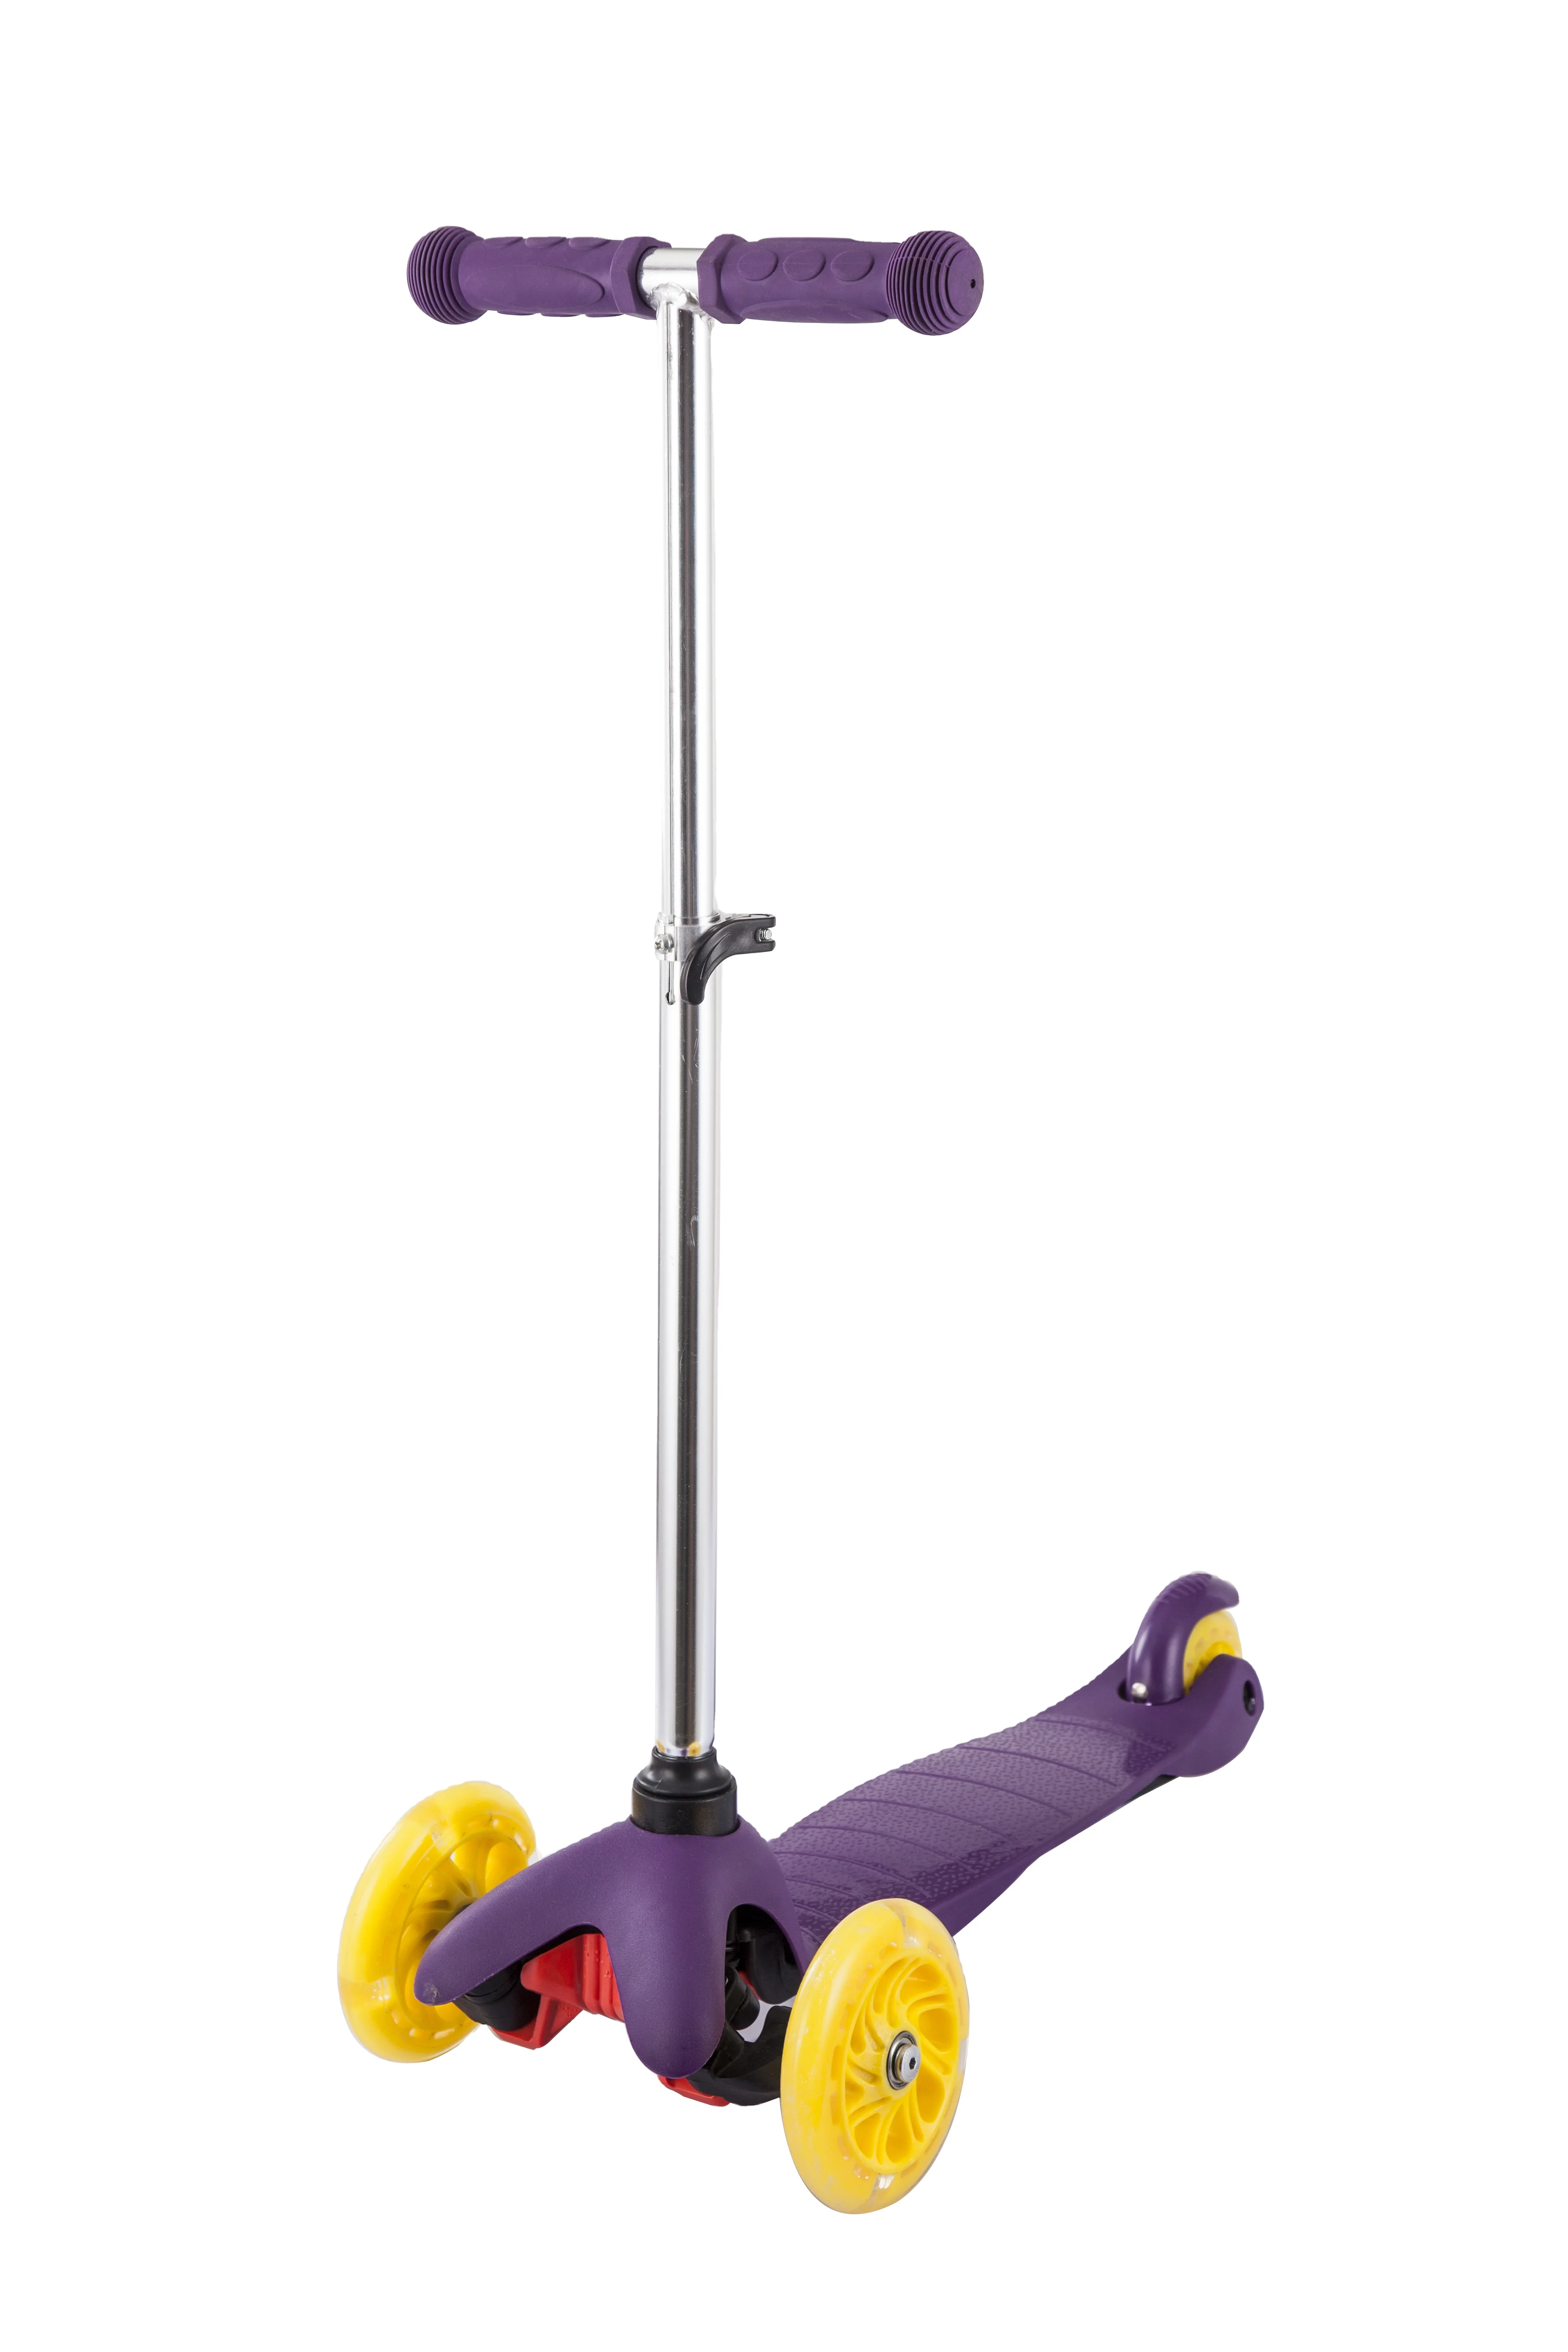 PU LED Wheels Height Adjustable Push Scooter for Kid Age 3-6